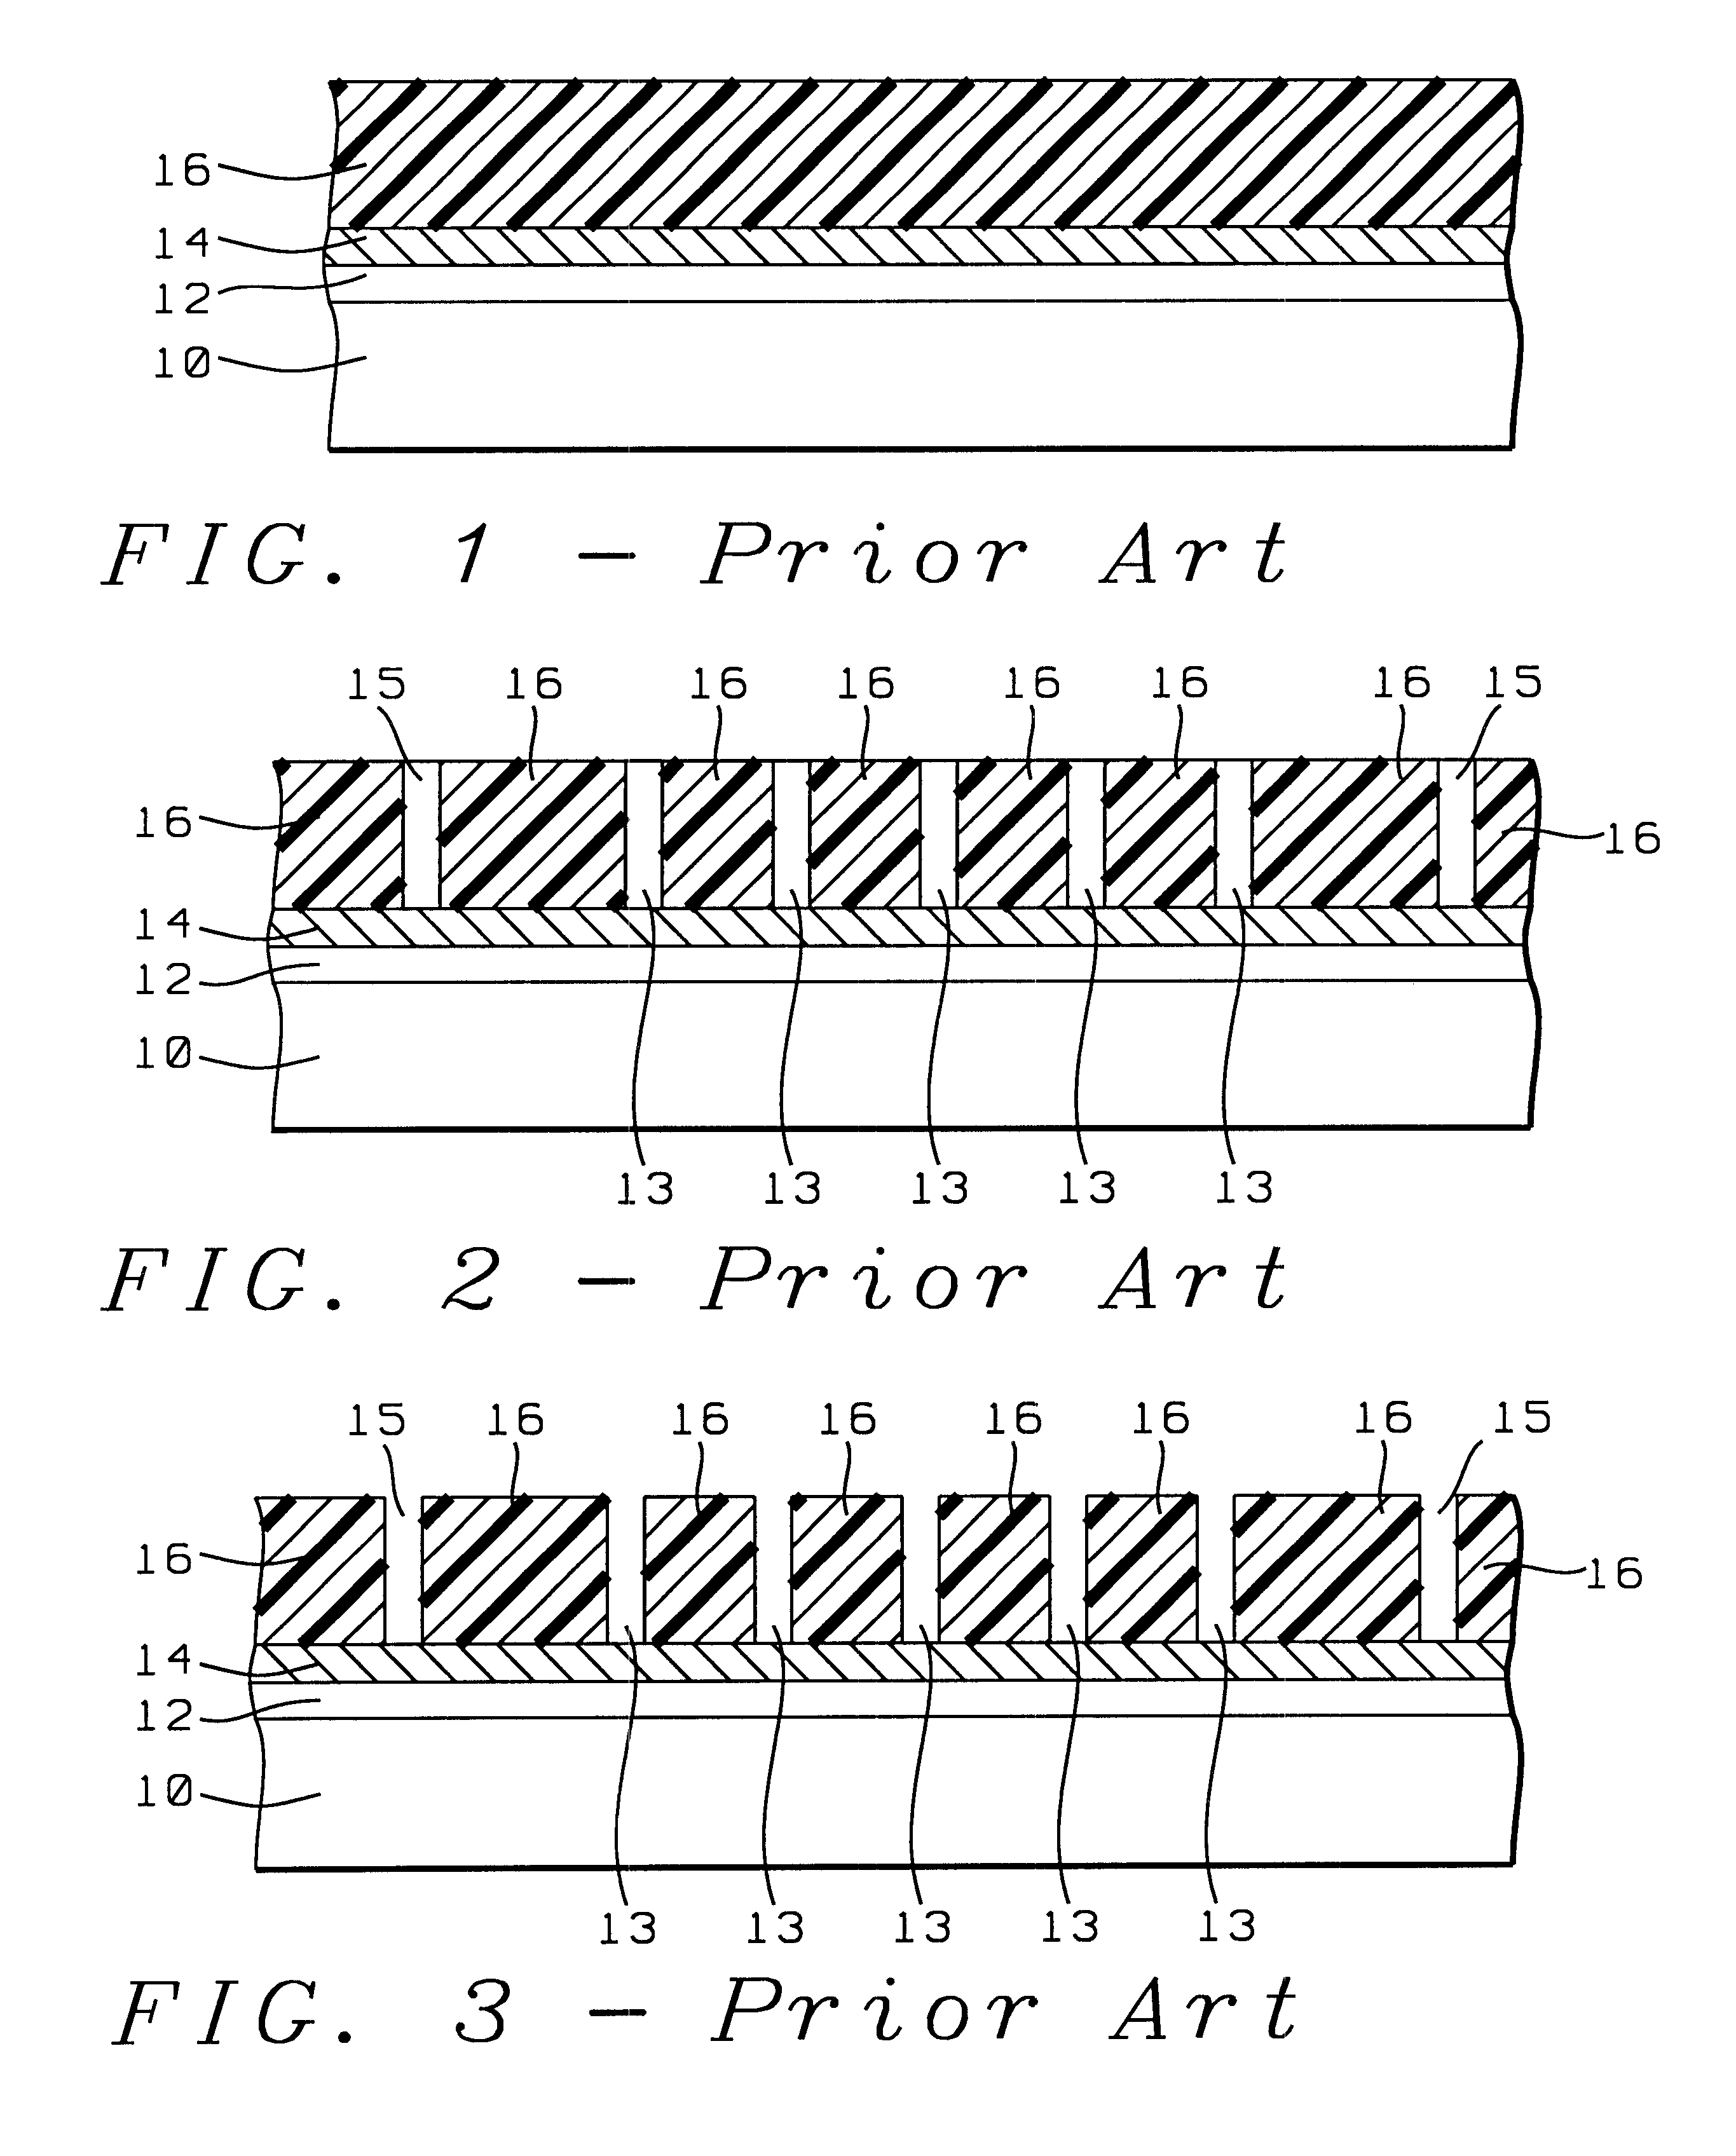 Self alignment process to fabricate attenuated shifting mask with chrome border